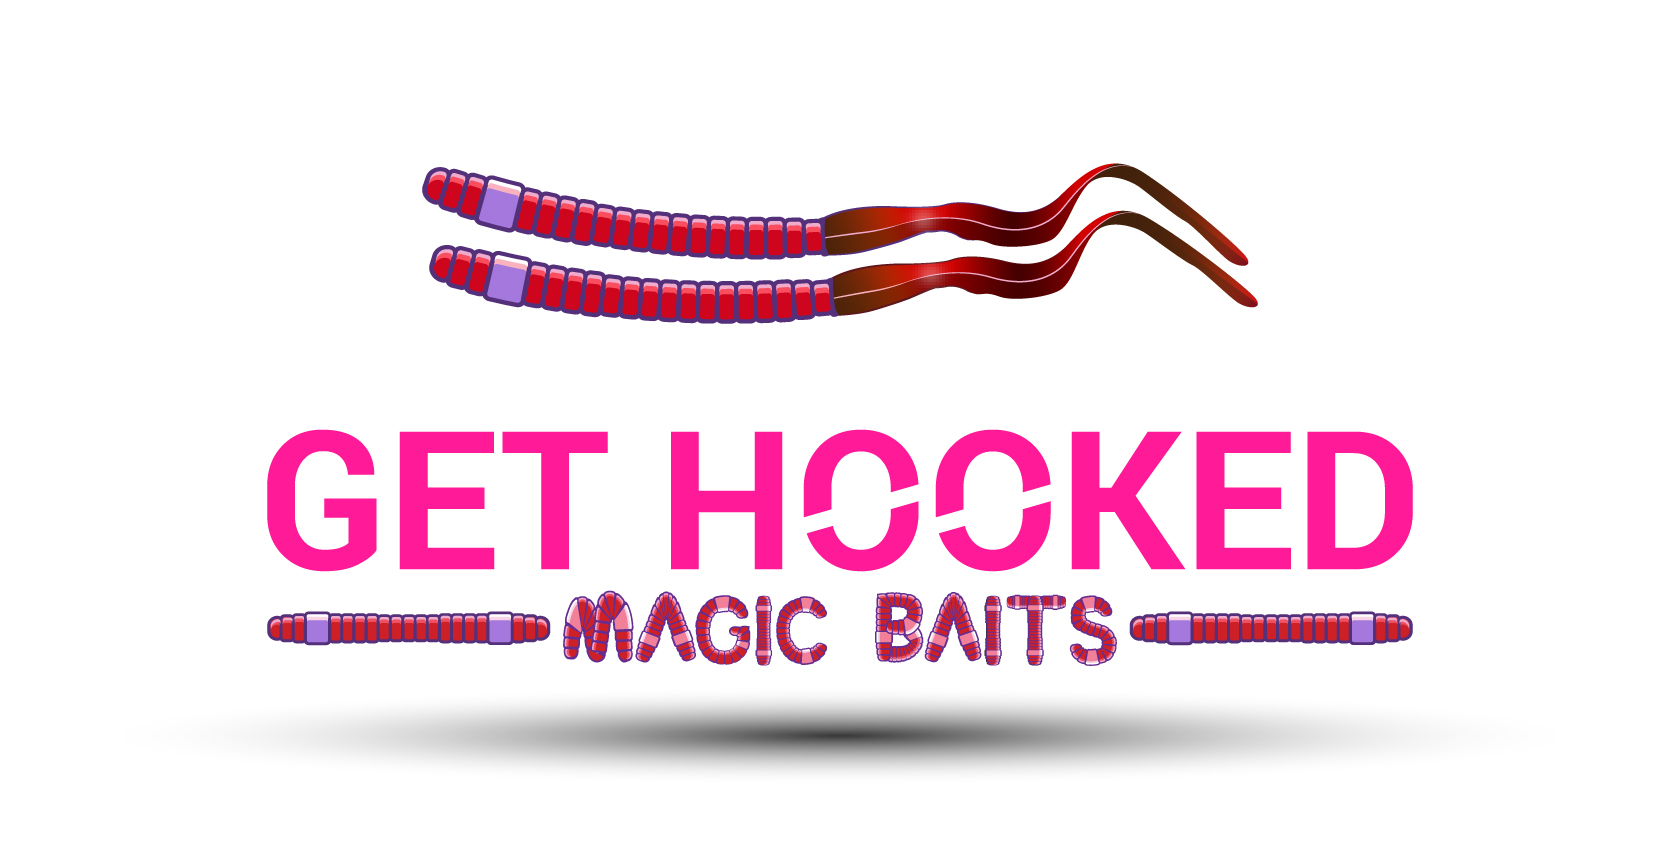 Soft plastic worm- 6 1/4 Inch We call this buzzsaw - Get Hooked Magic Baits